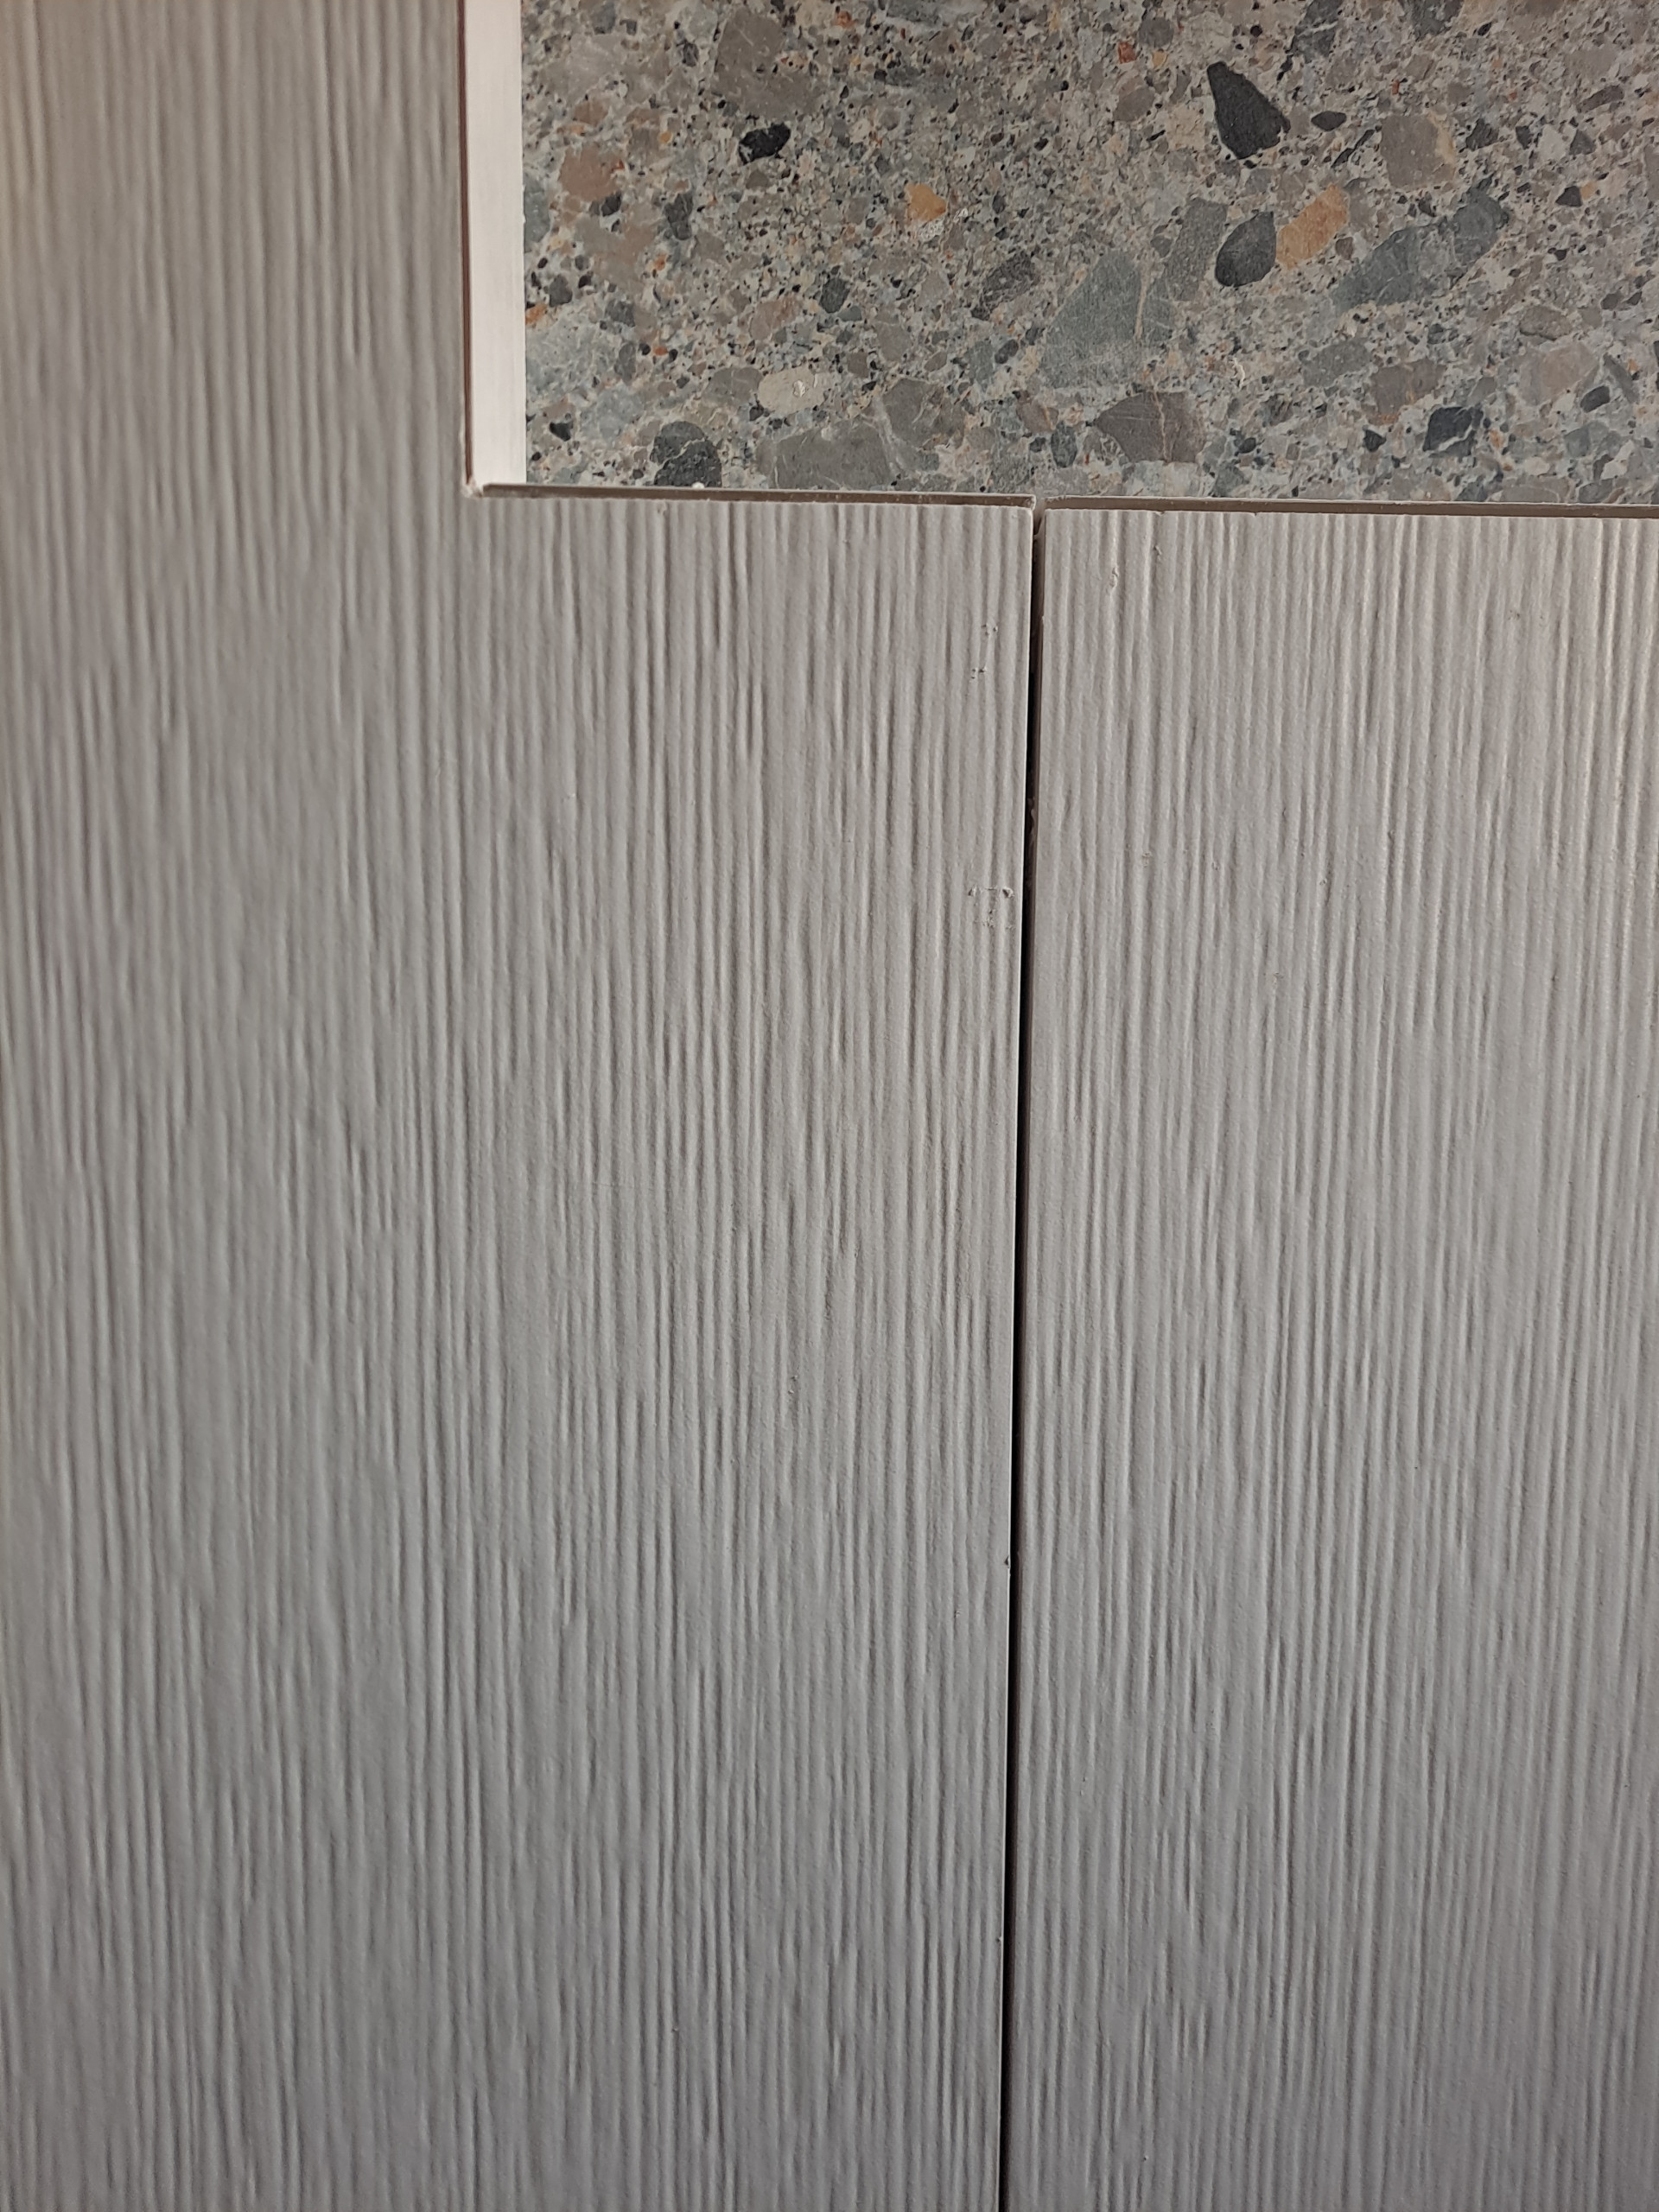 Textured Wall Tile